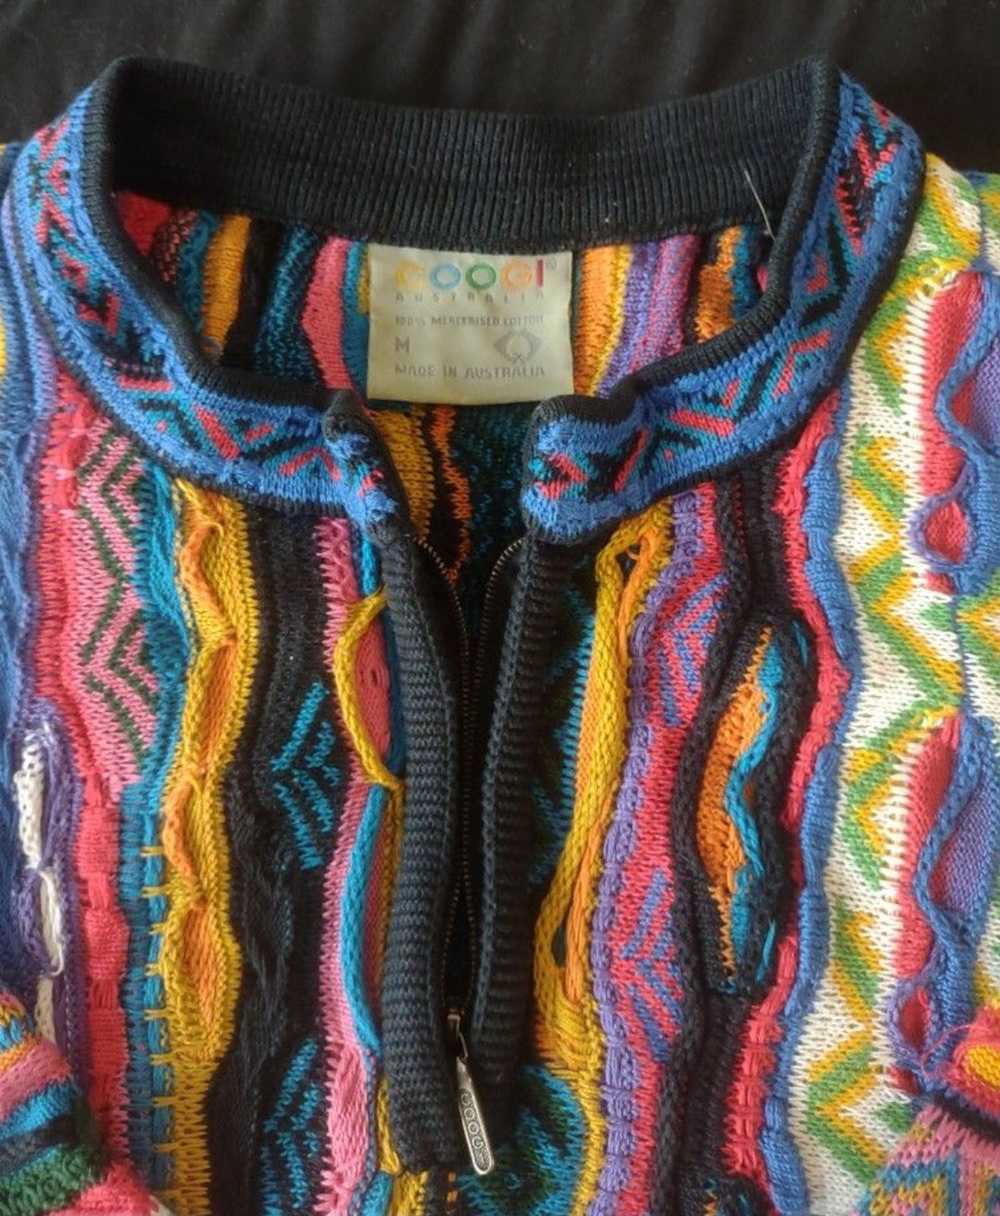 Coogi Authentic and Vintage COOGI Sweater - image 2